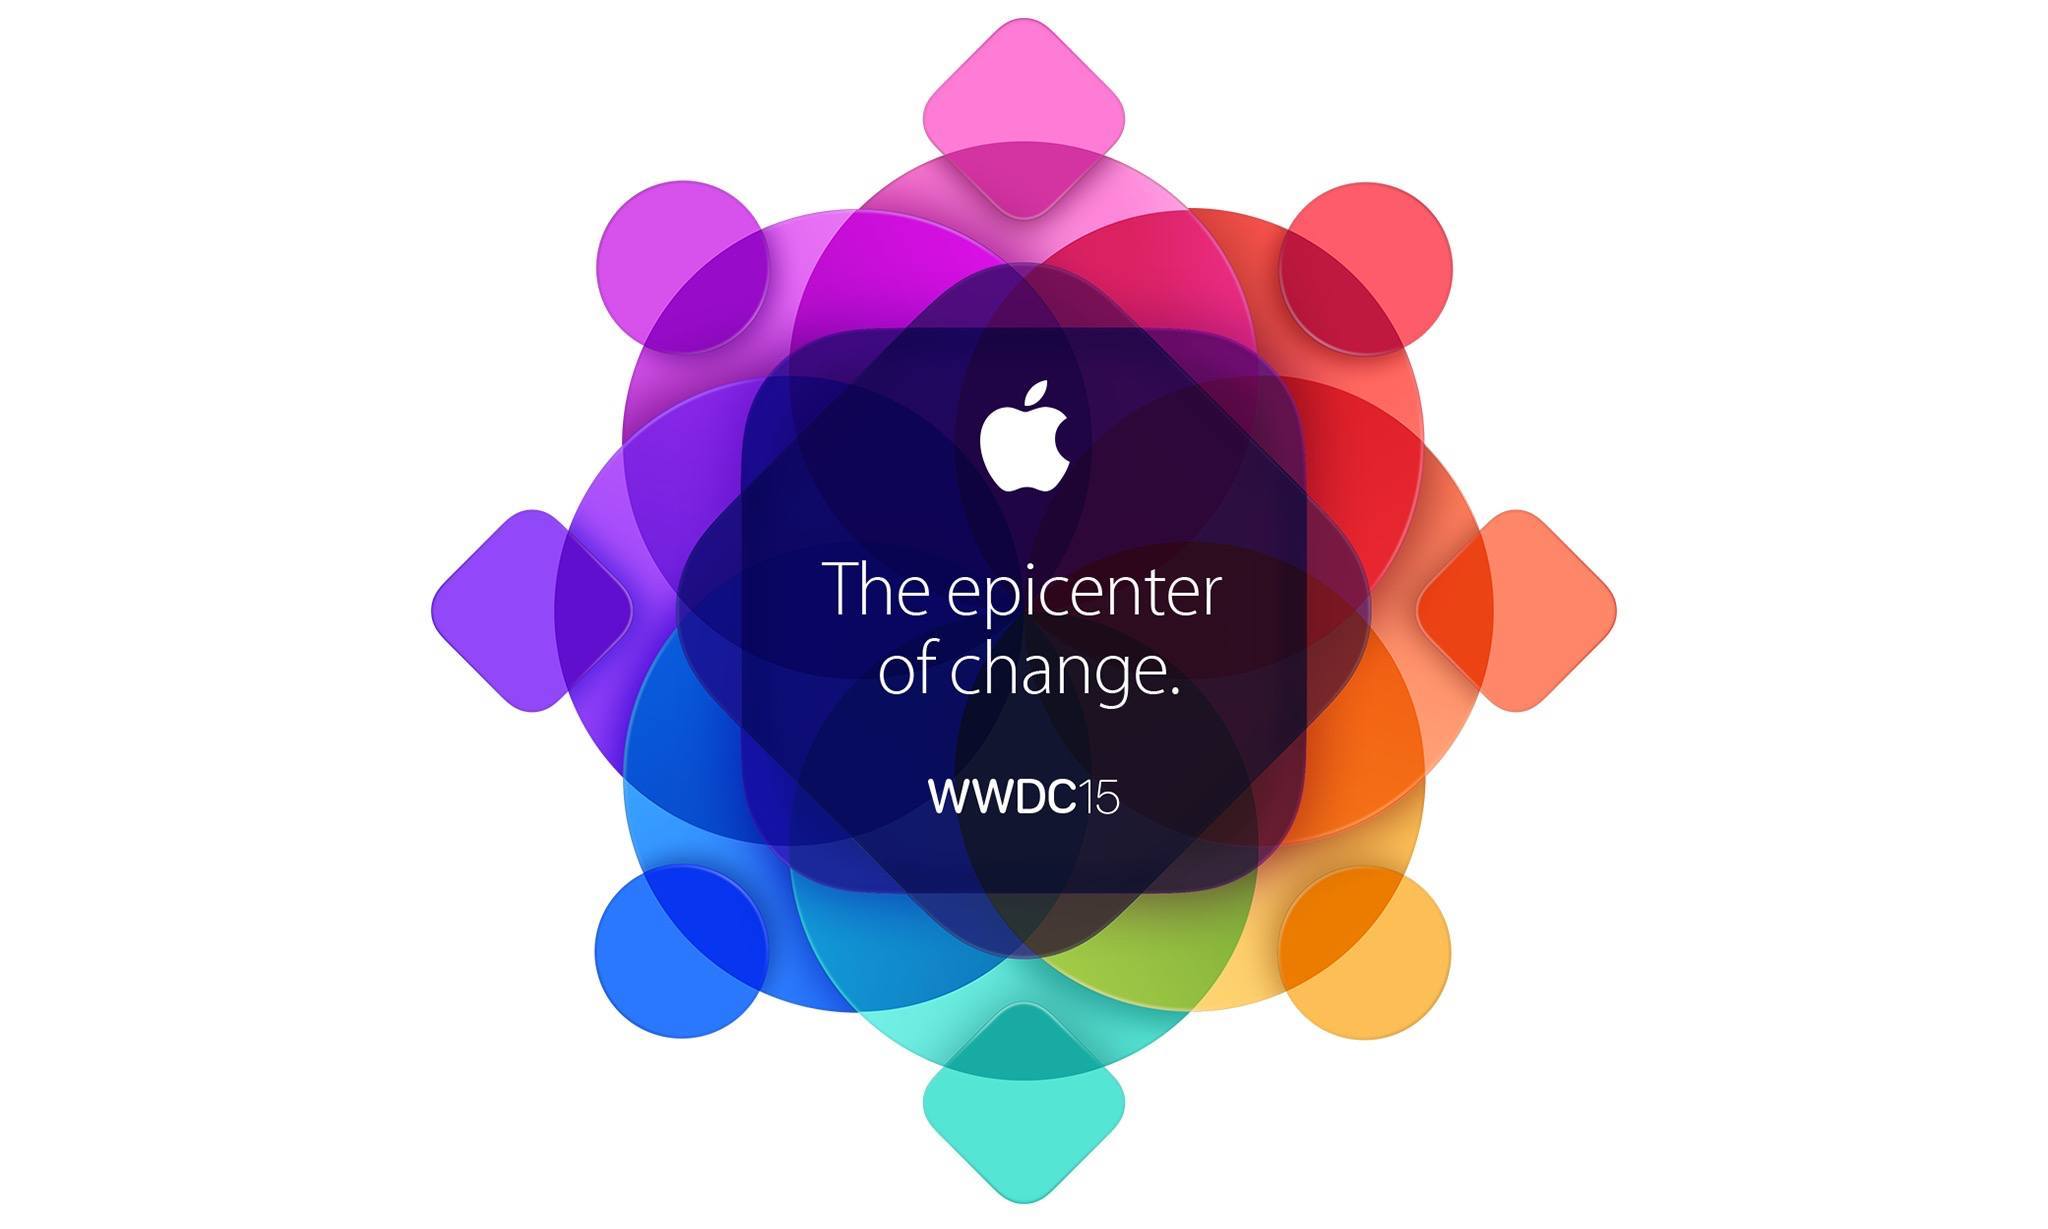 5 reasons to mark your calendar for Apple's Worldwide Developers